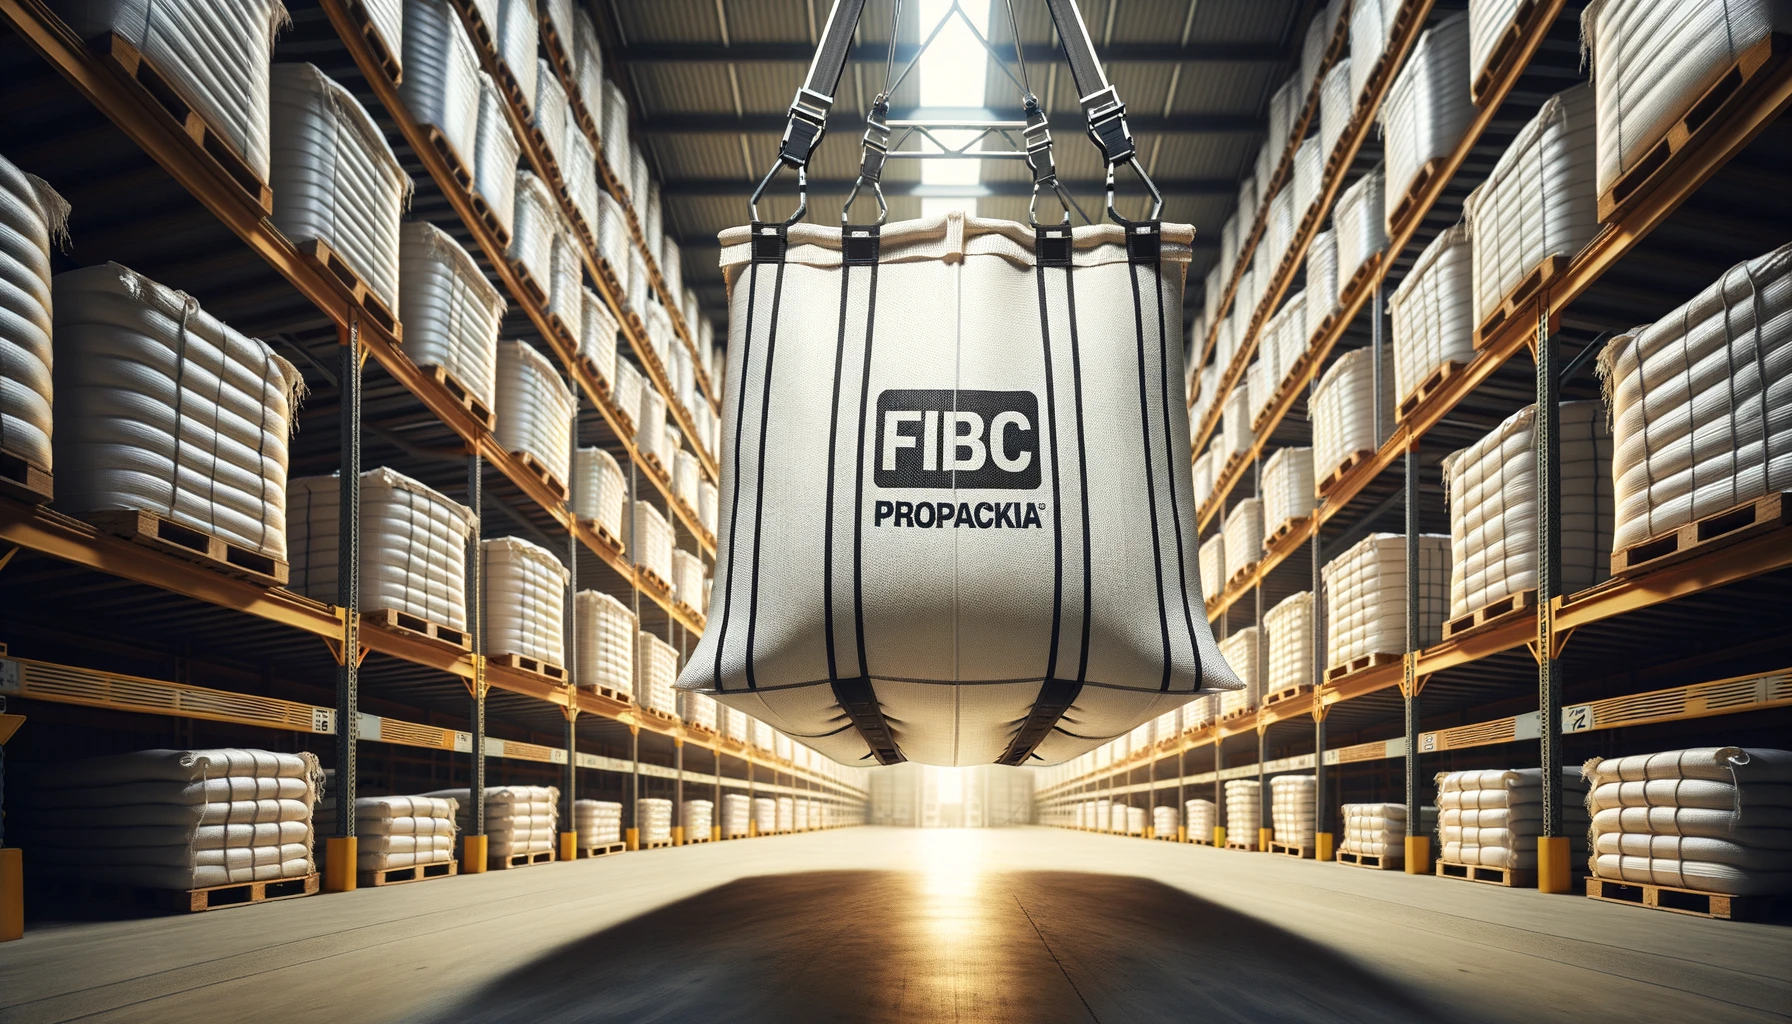 FIBC (Flexible Intermediate Bulk Container) bags made from woven polypropylene fabric, placed in a warehouse setting. 